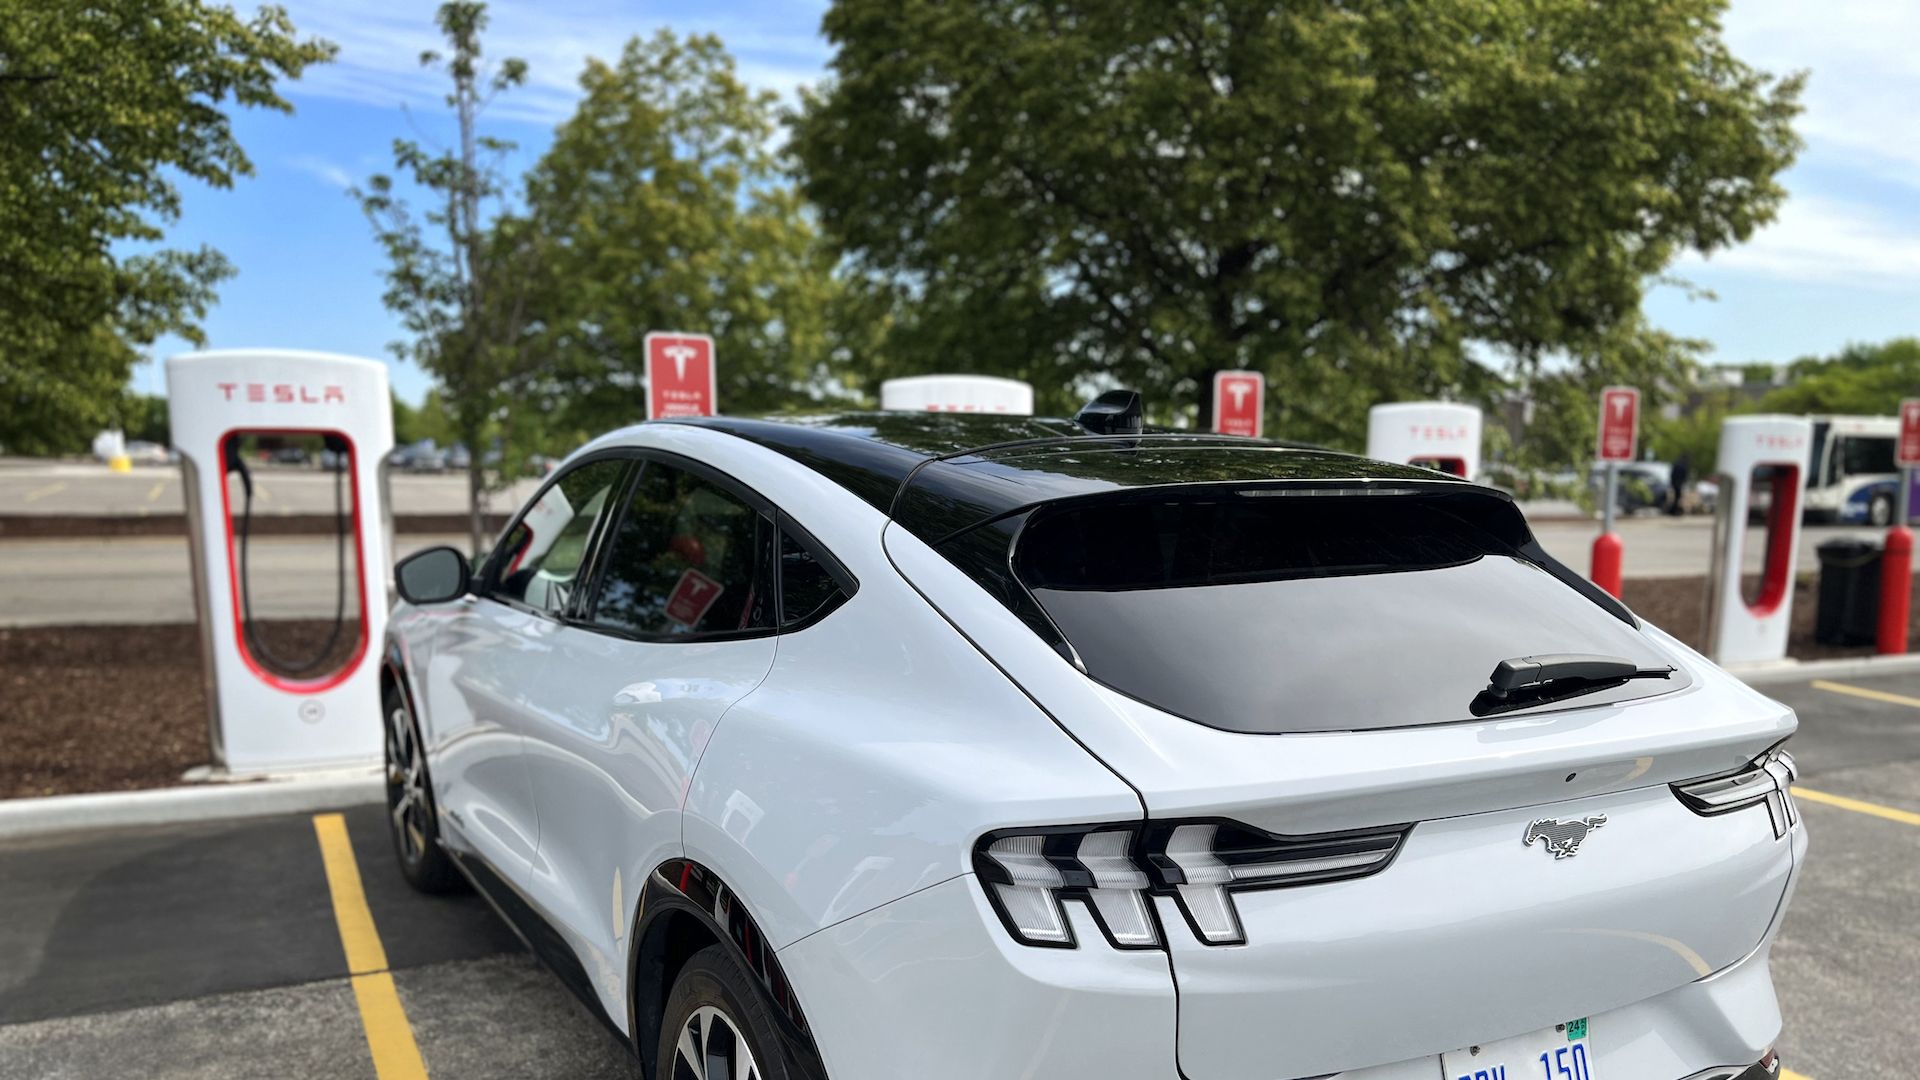 Photo of a Ford electric vehicle at a Tesla charging station